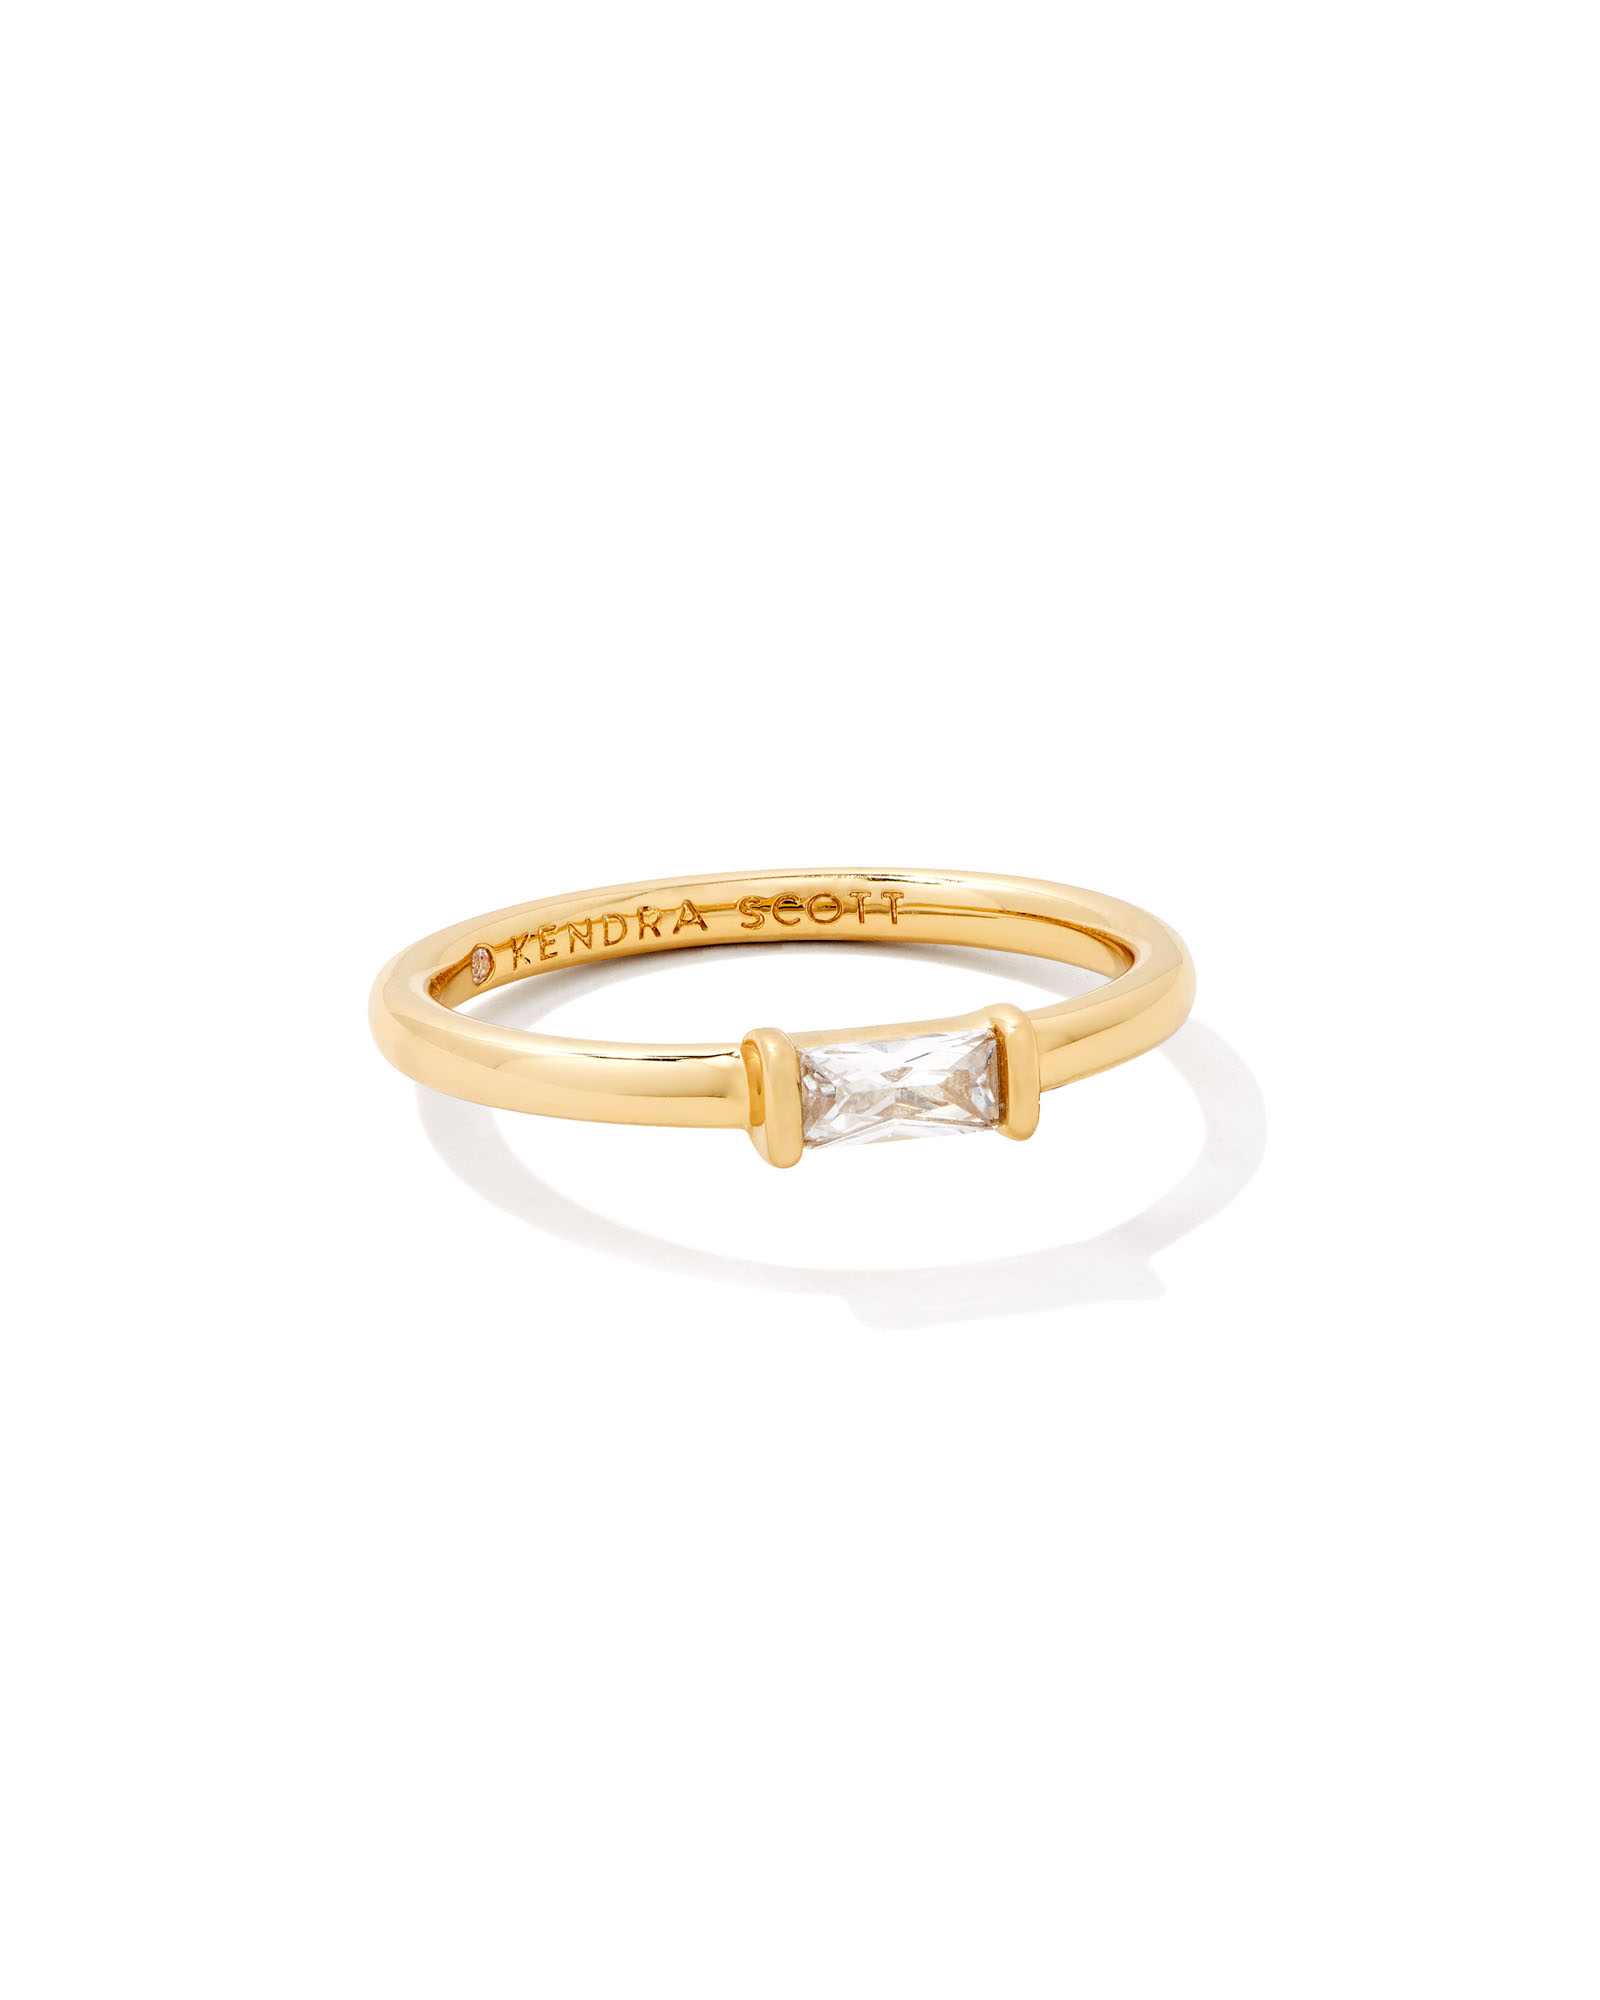 Juliette Gold Band Ring in White Crystal | Kendra Scott